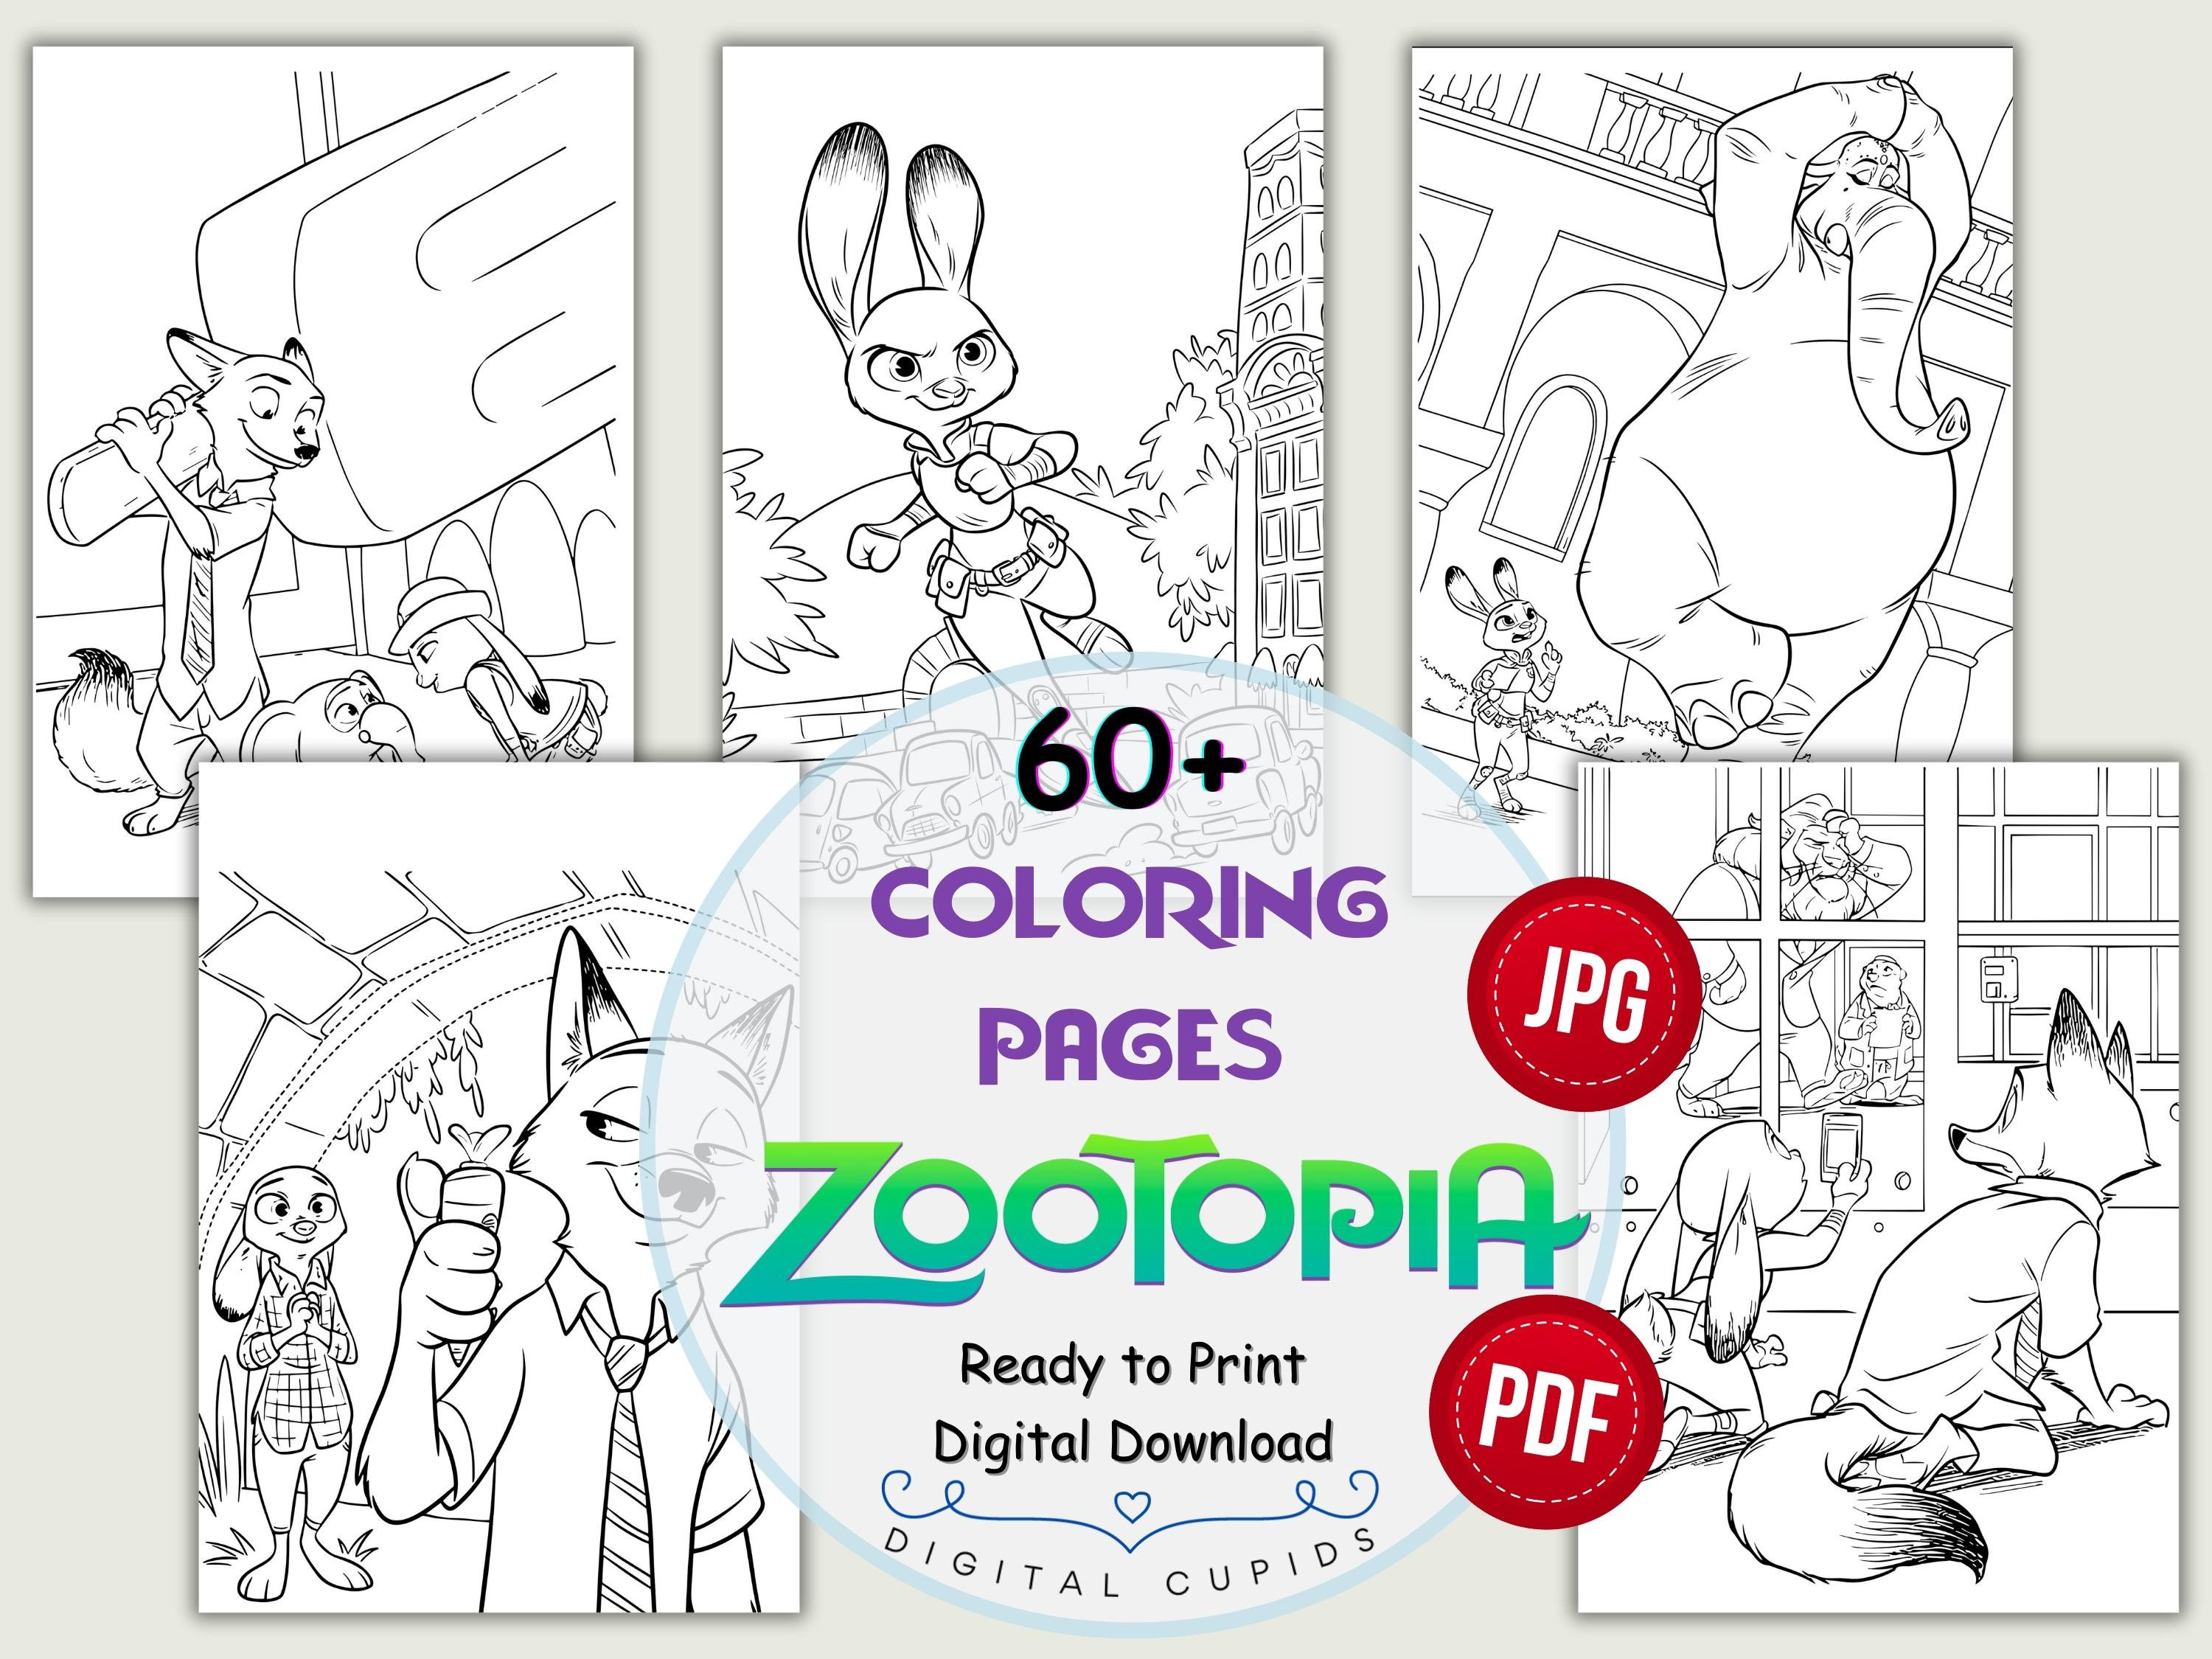 Zootopia movie coloring pages jpg pdf zootropolis illustrations judy hopps nick i kid activity drawing sheets ready to print a size